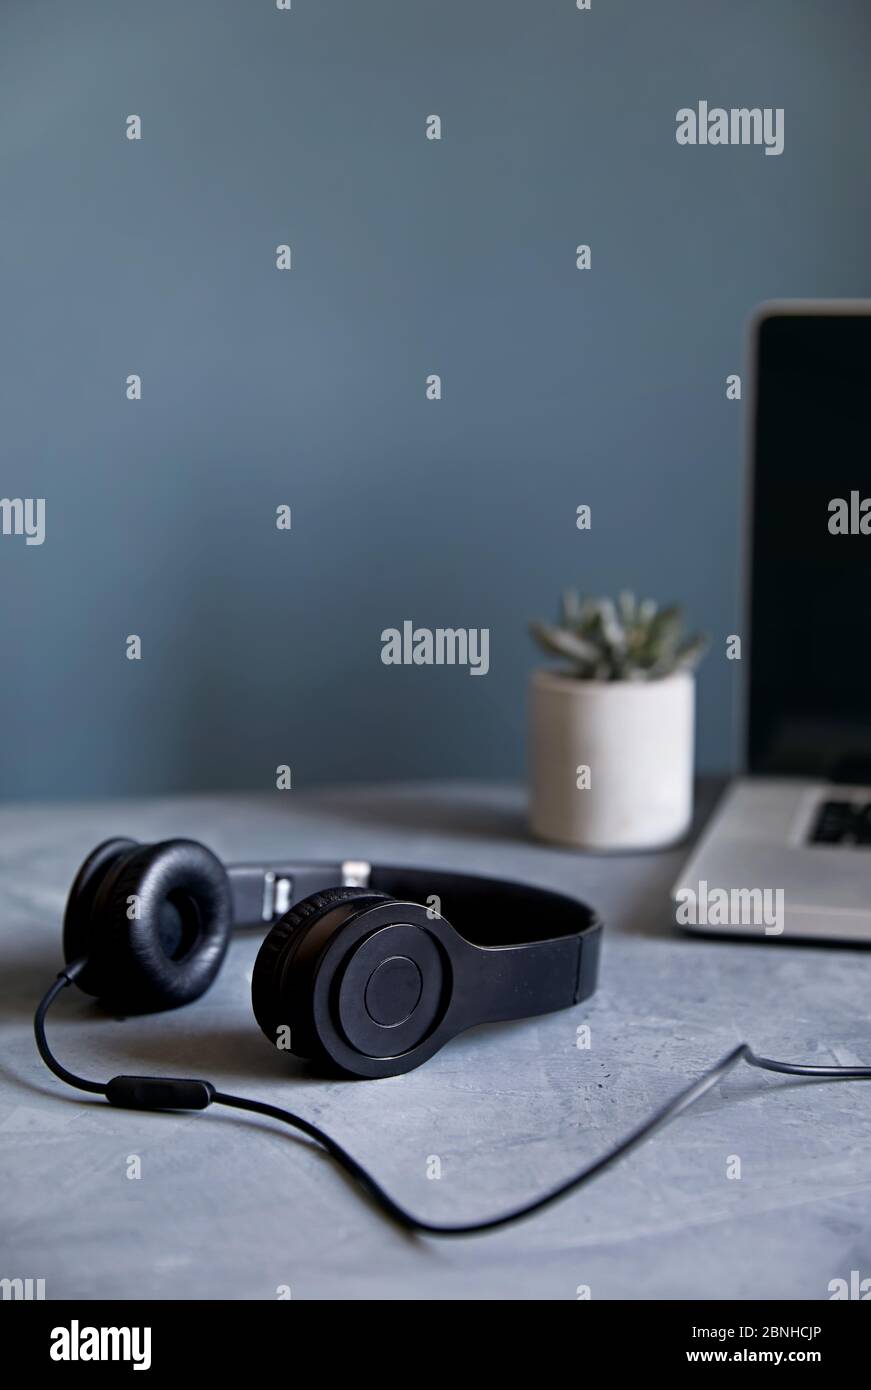 Empty workspace with laptop, headphones and plant at stone grey wall background. Working from home concept. Stock Photo